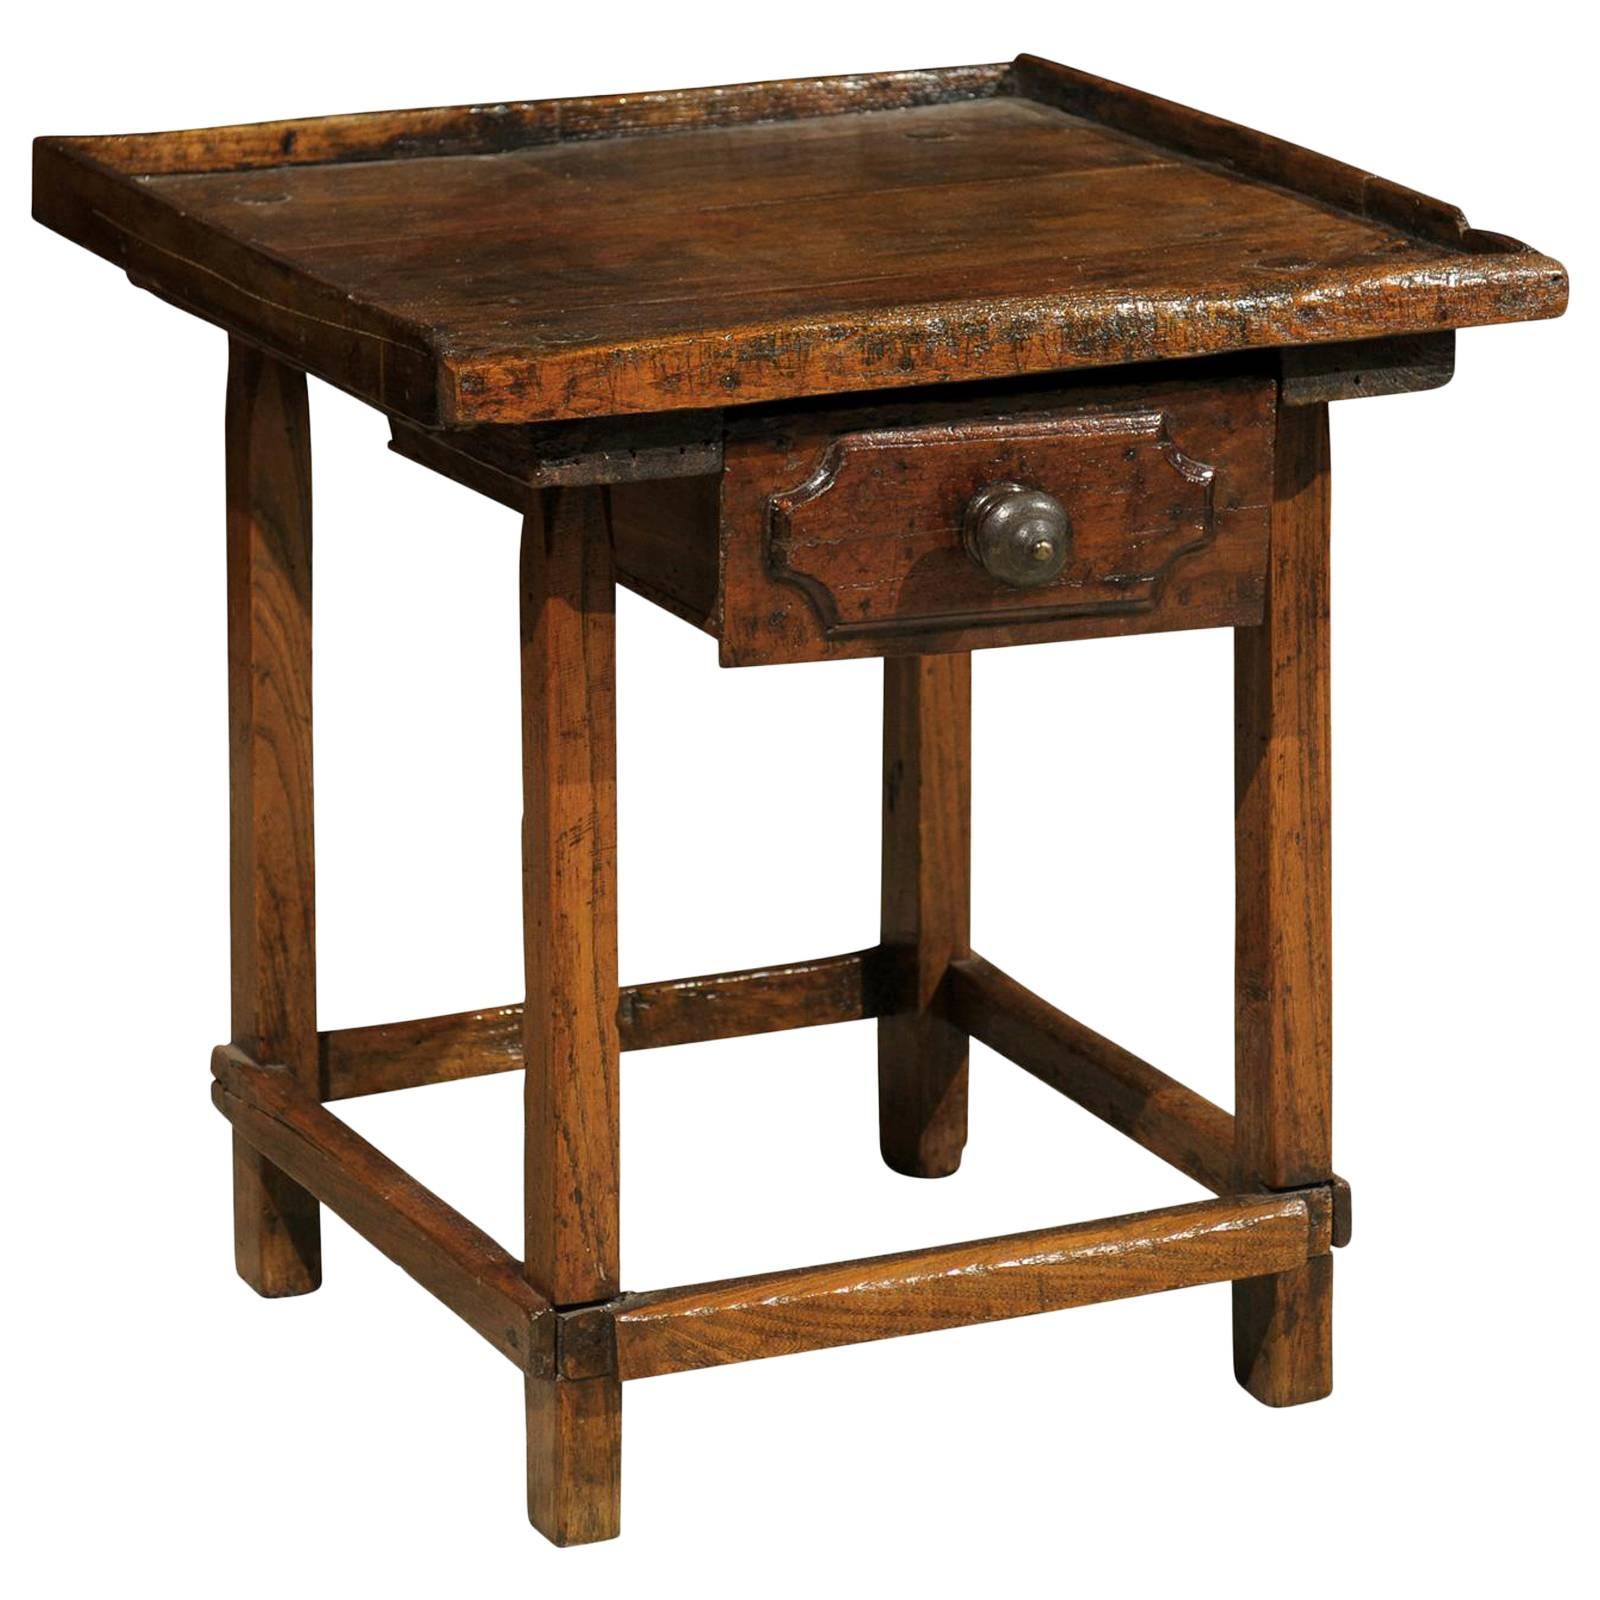 19th Century Pine Shoe Maker Table with Drawer